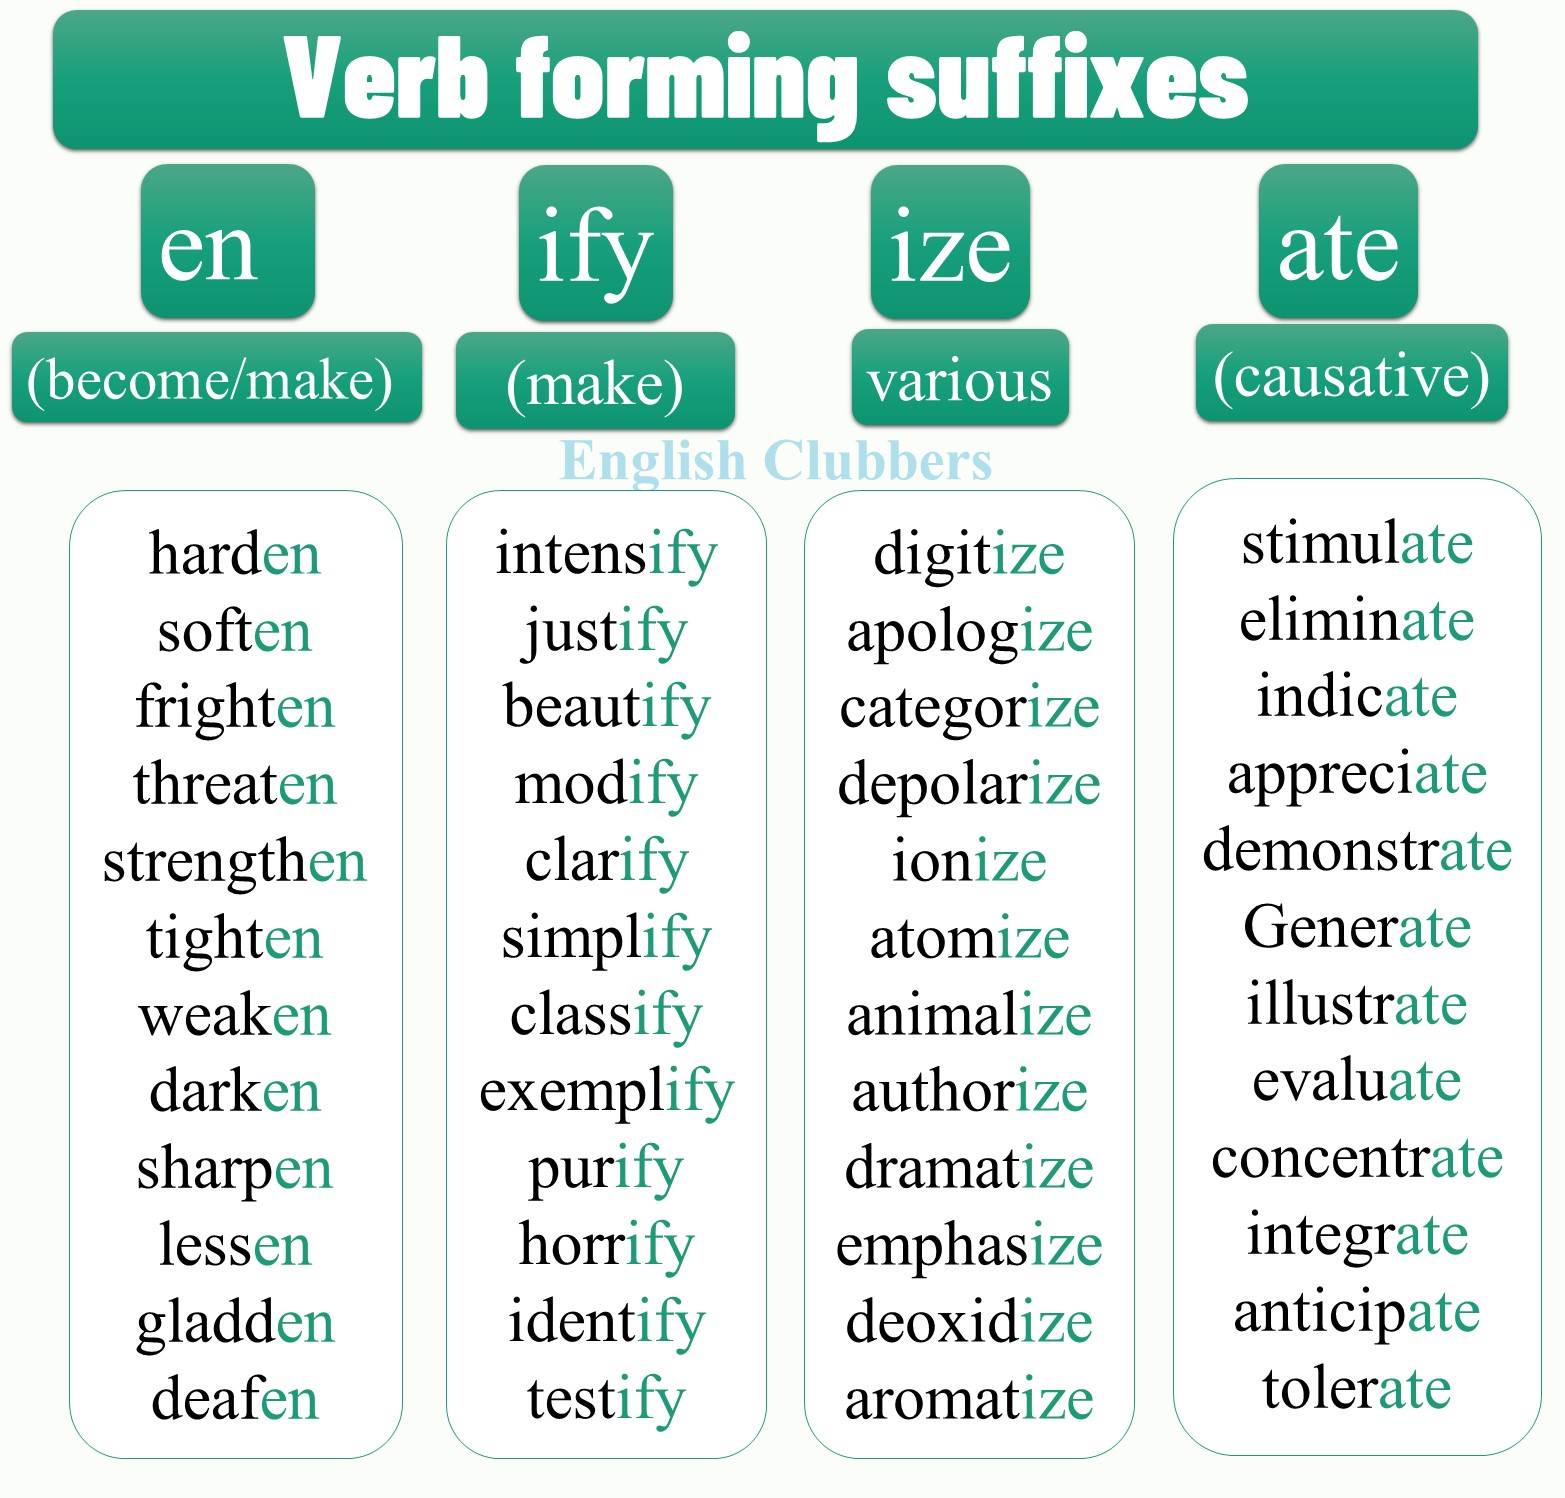 Adjective forming suffixes. Verb forming suffixes. Verb forms. Word formation verbs. C) verb-forming suffixes:.